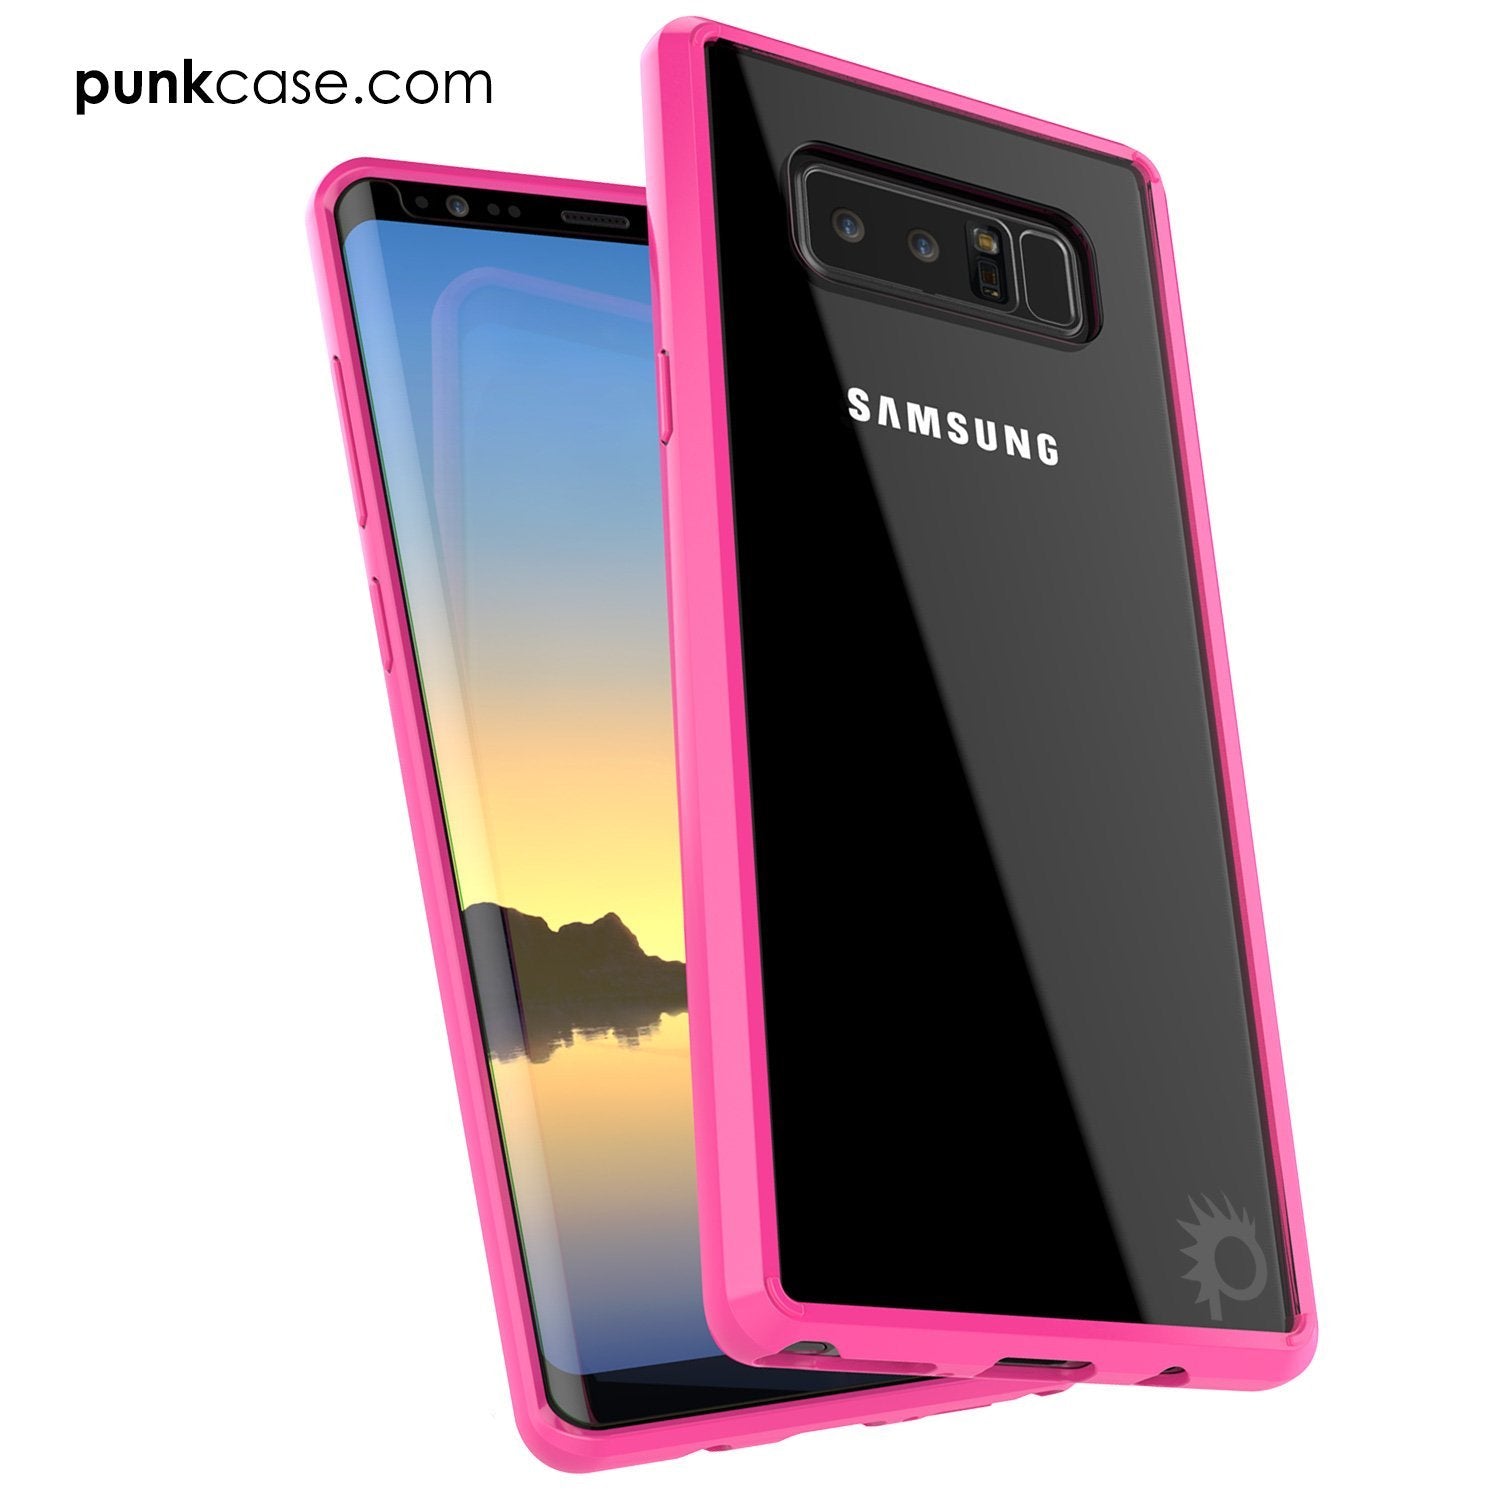 Galaxy Note 8 Punkcase, LUCID 2.0 Series Armor Case Anti-Shock, Pink